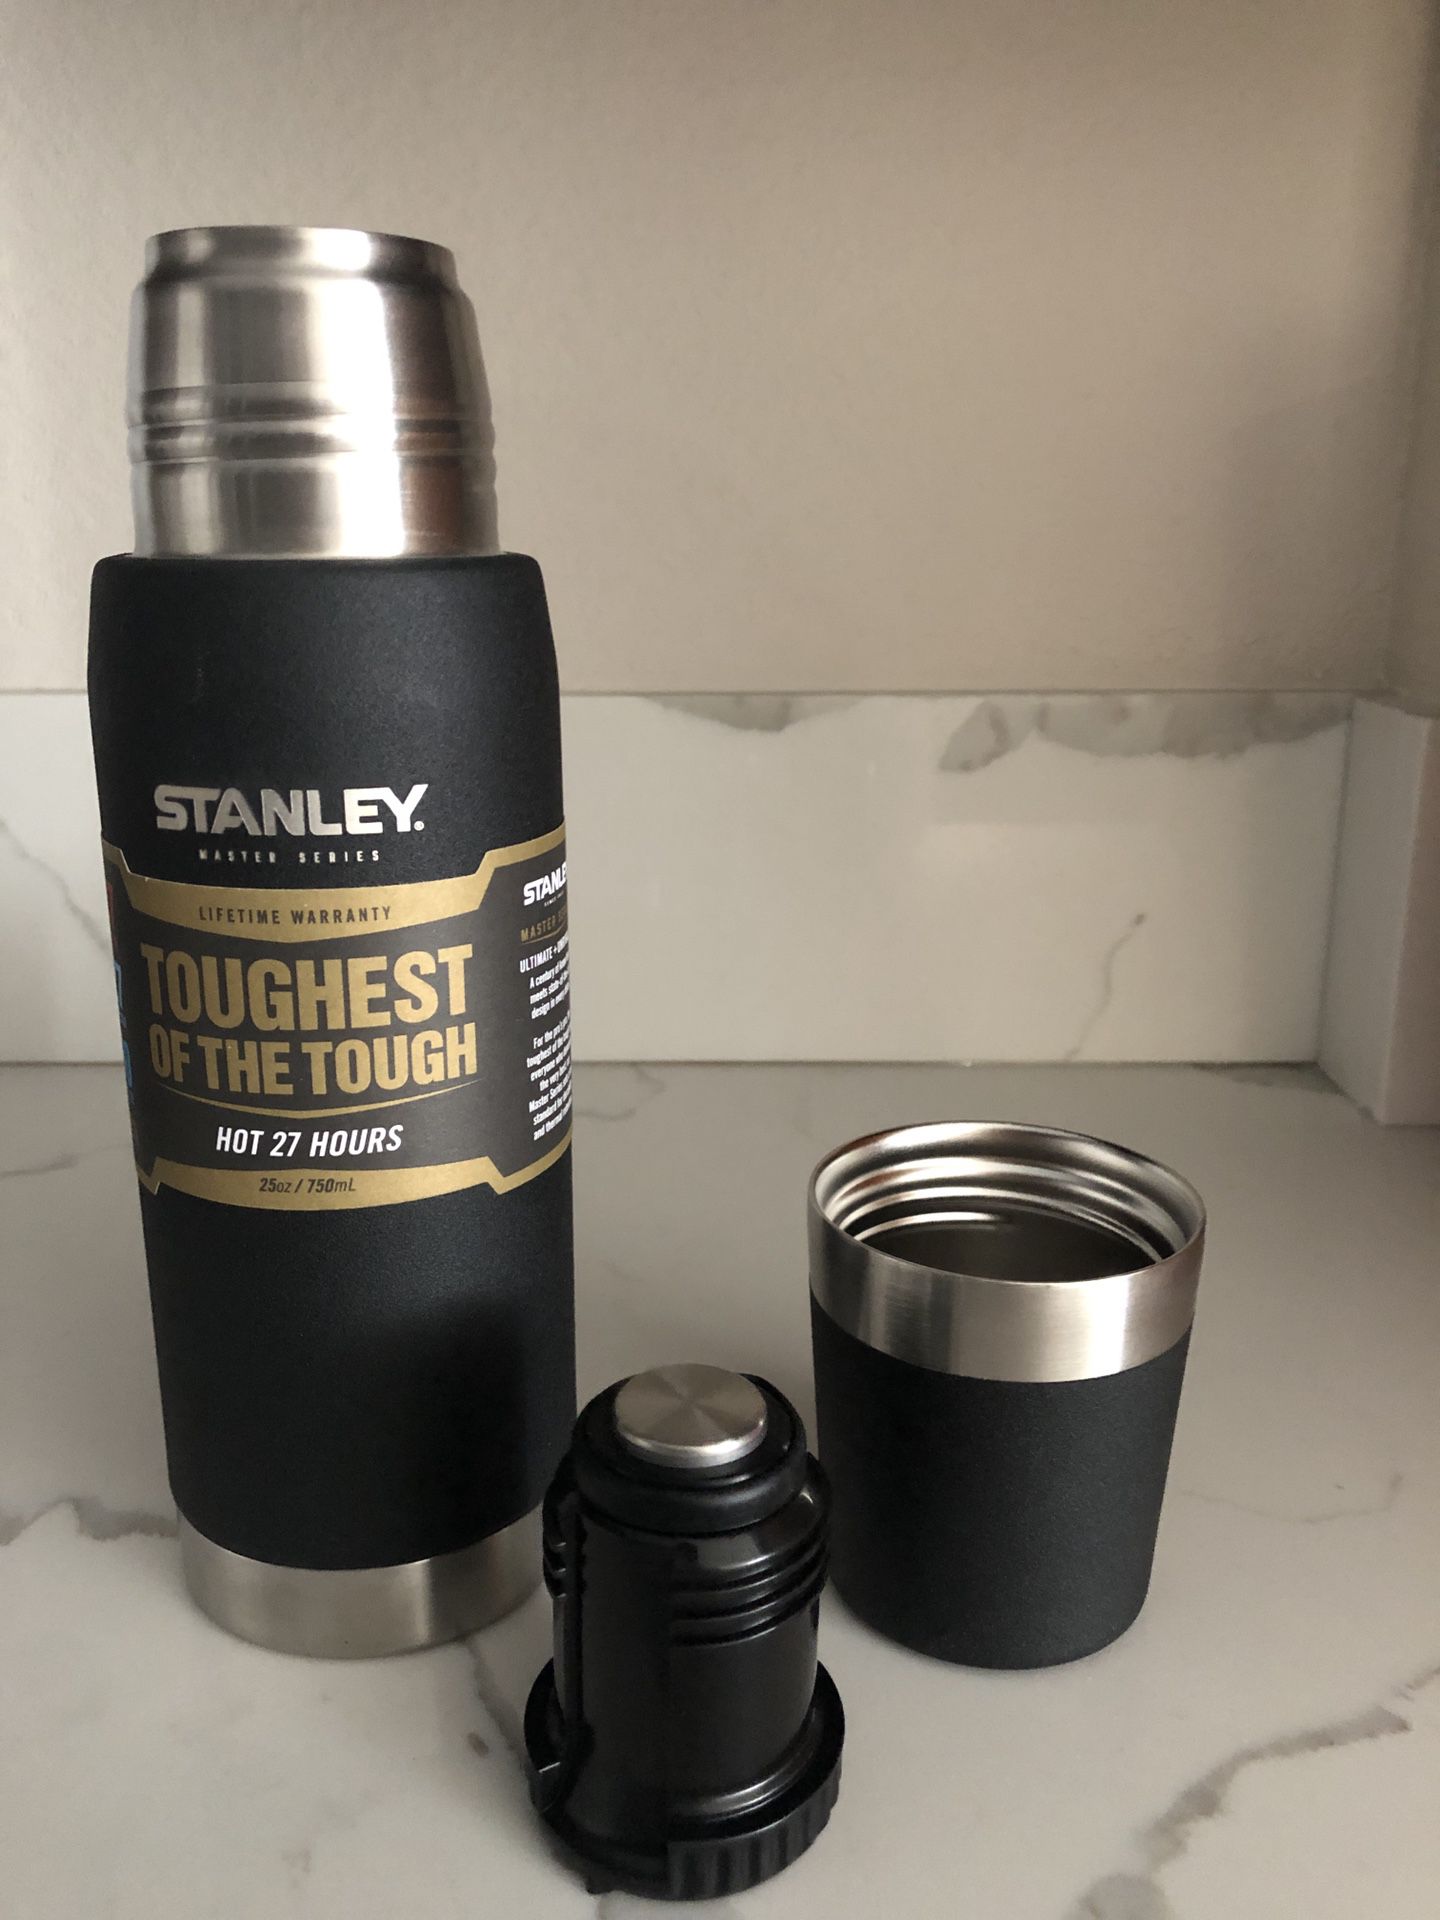 New Stanley Master series 25oz insulated bottle for Sale in